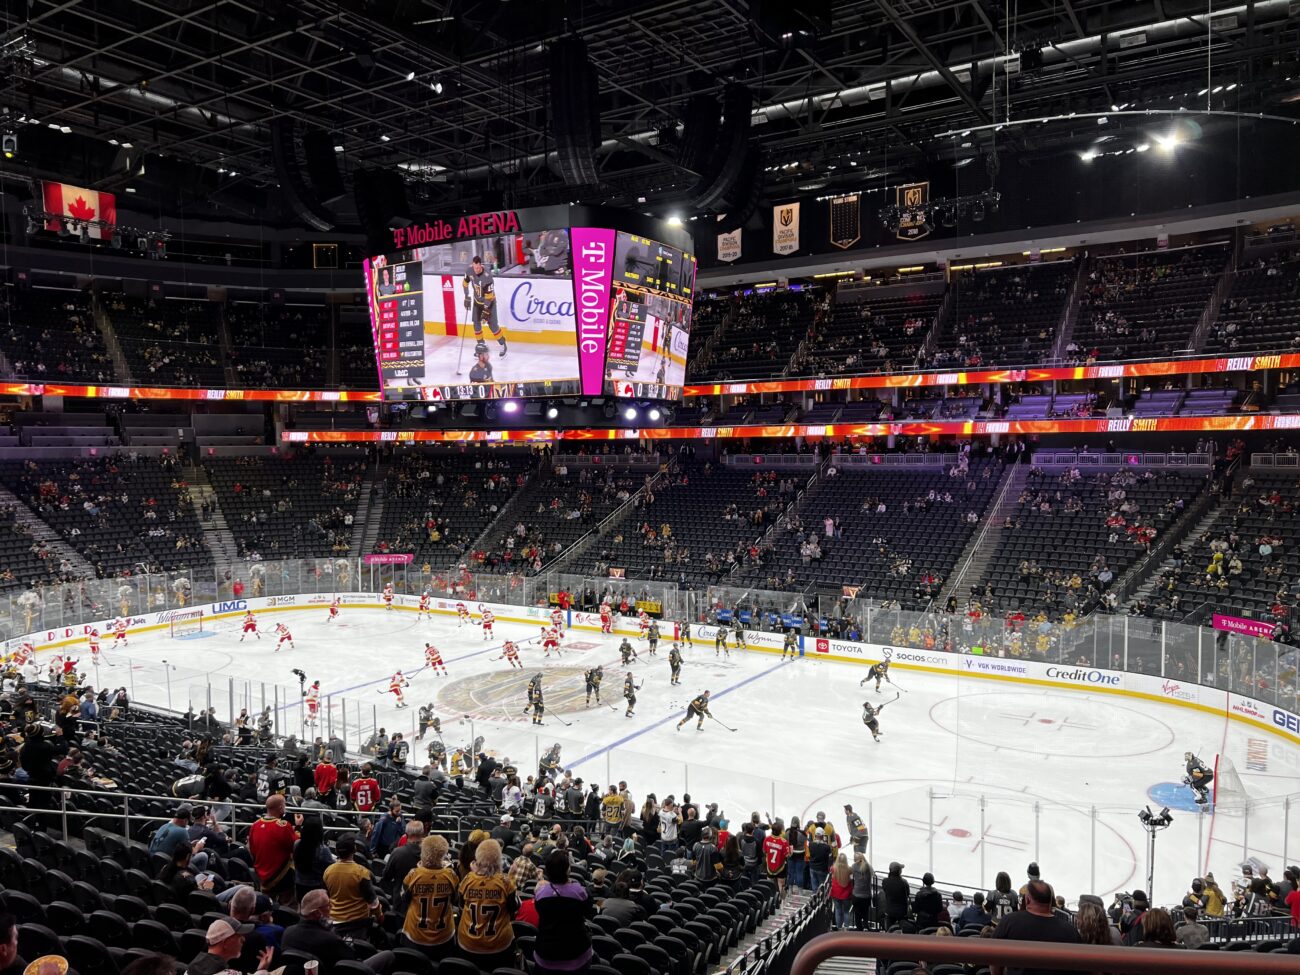 Seating capacity expanded for Vegas Golden Knights' games